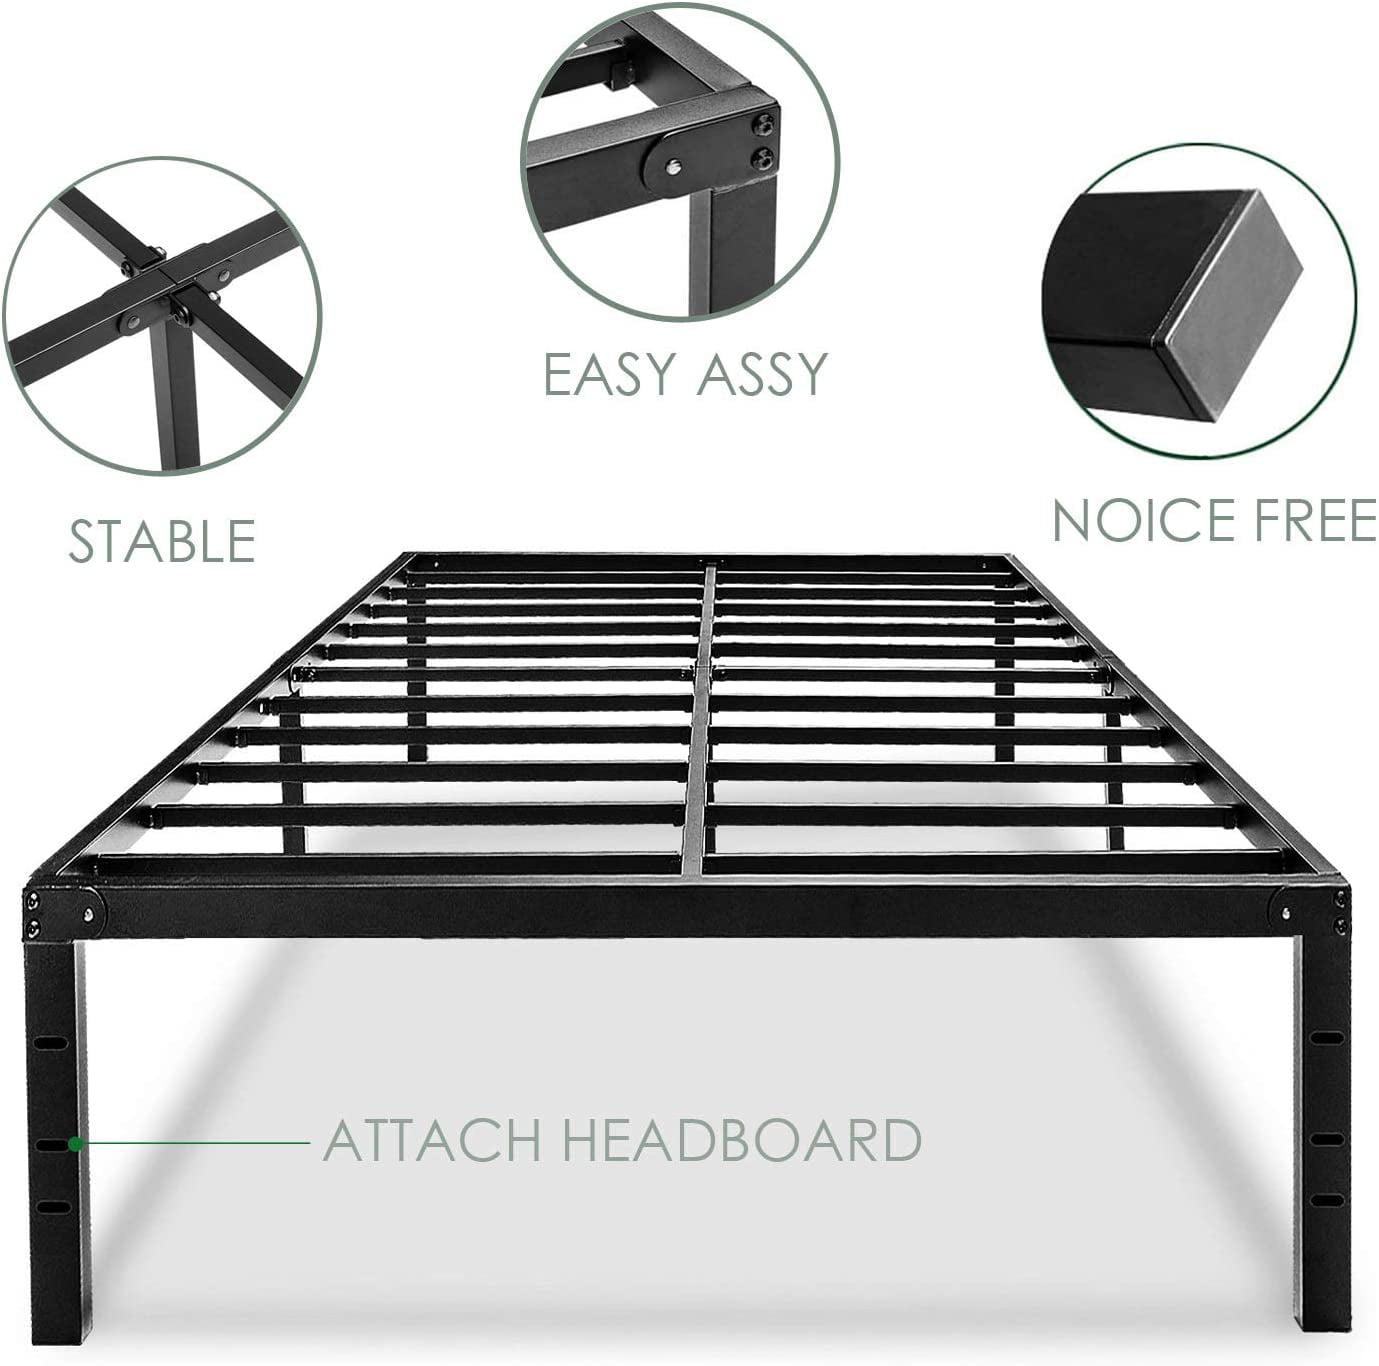 FOYUEE Platform King Bed Frame 18 inch Tall, No Box Spring Needed Metal Bedframe with Storage Heavy Duty